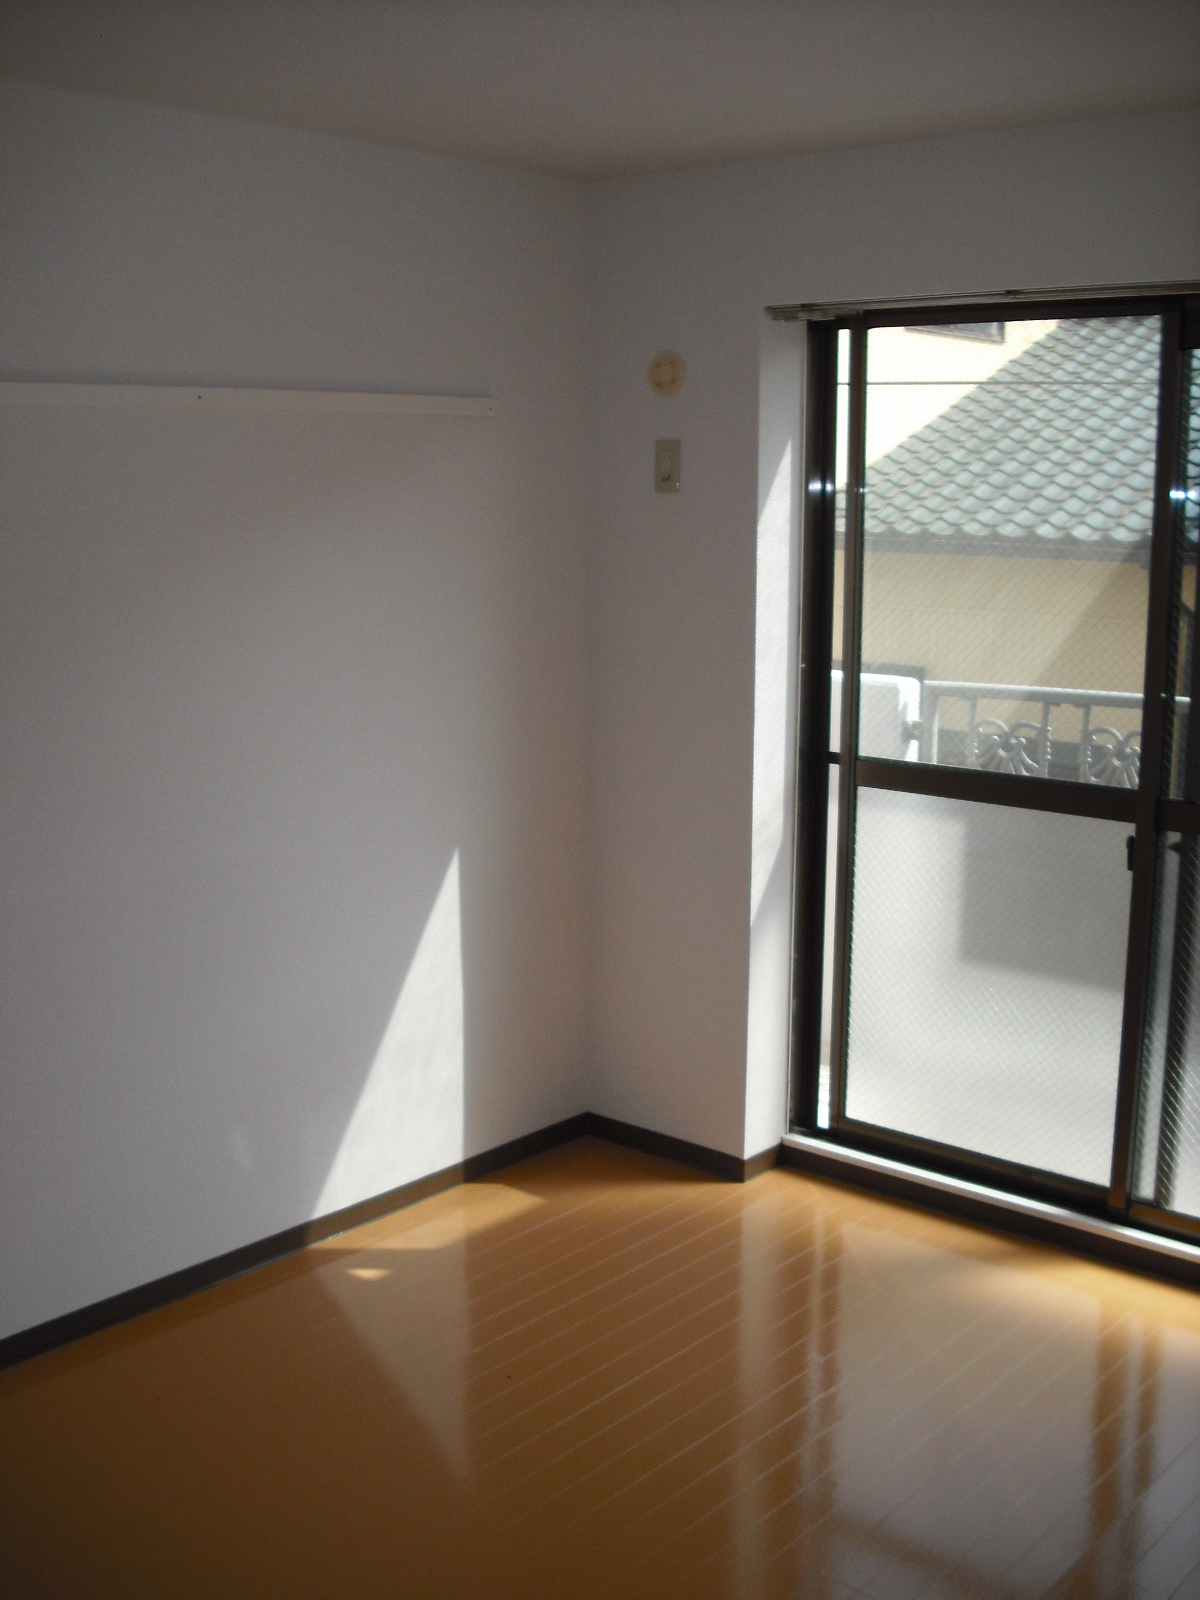 Other room space. The south side of the Western-style A